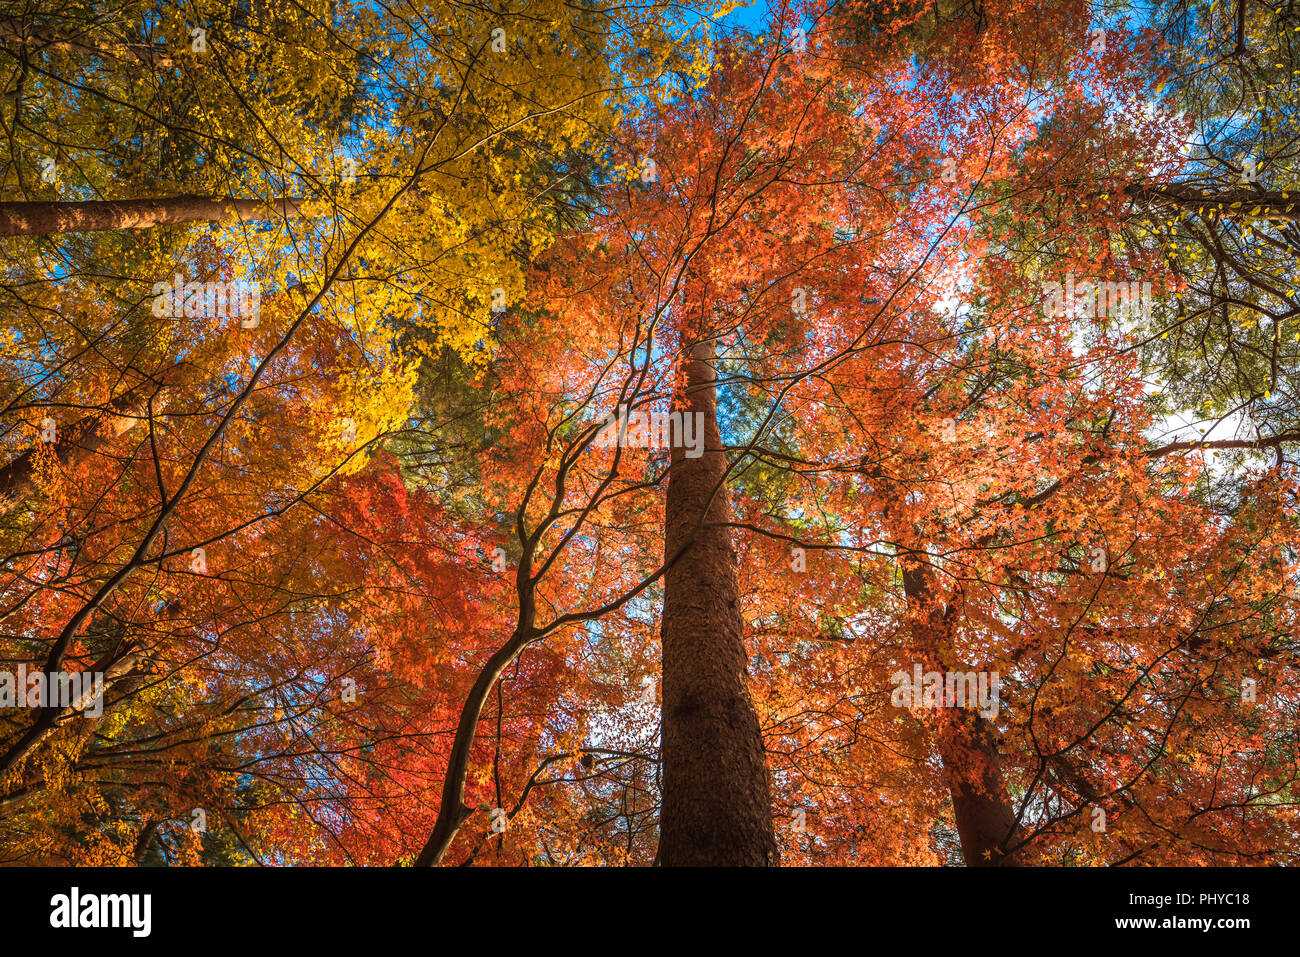 multi color trees in the autumn forest Stock Photo